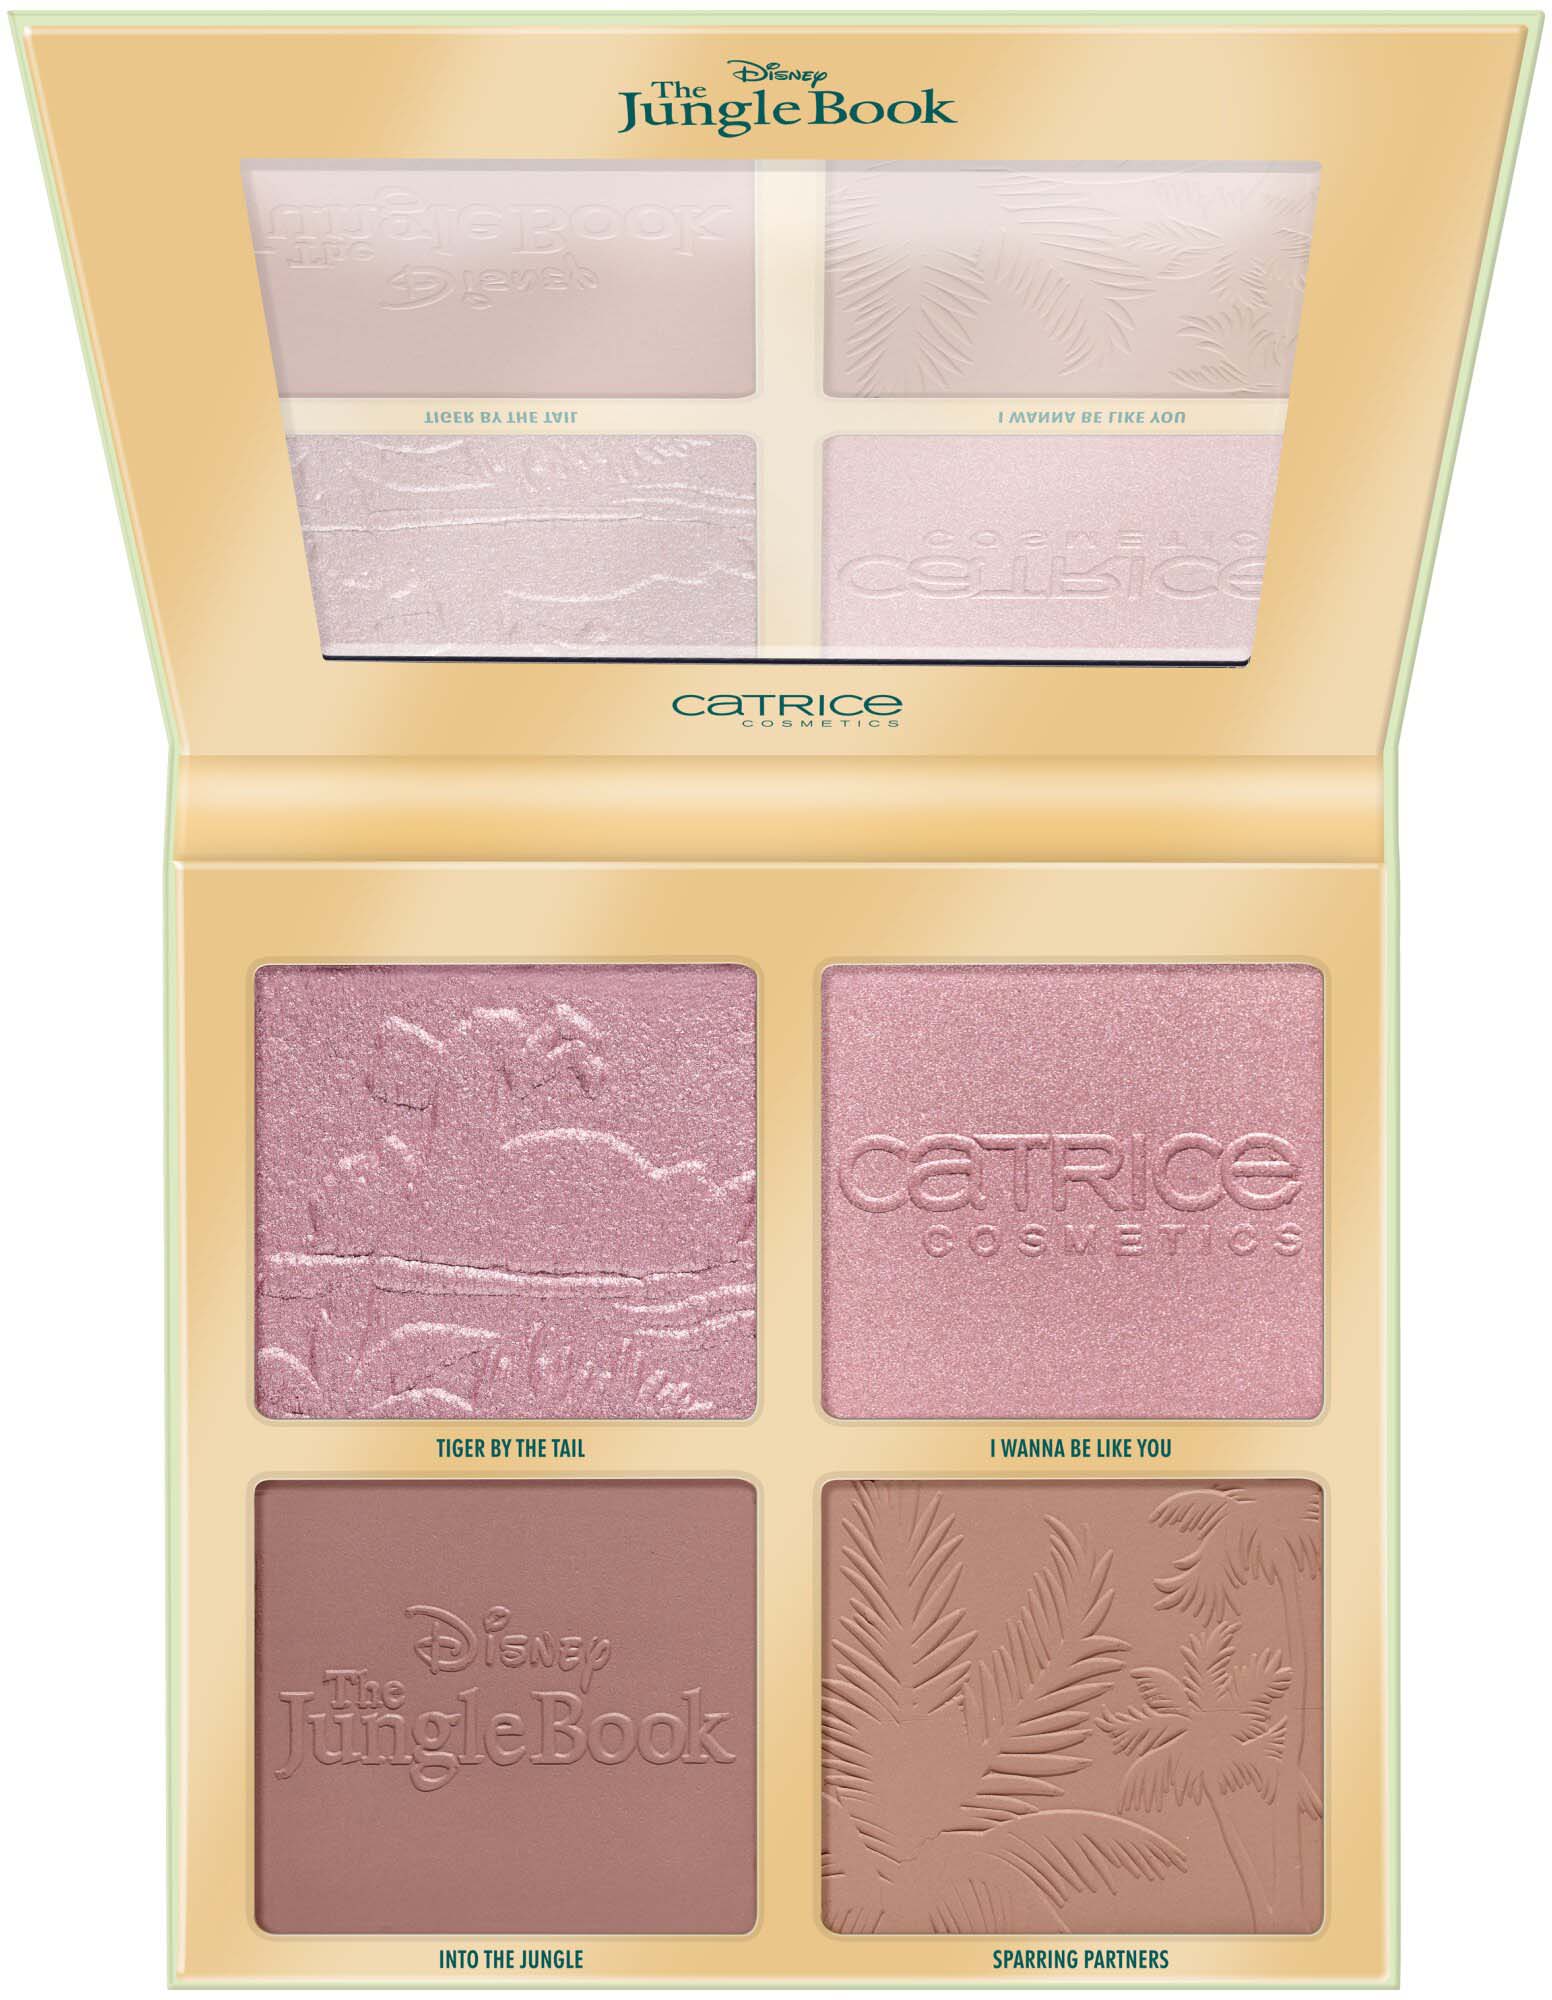 Catrice Disney The Jungle Book Face Palette 020 Wild About You